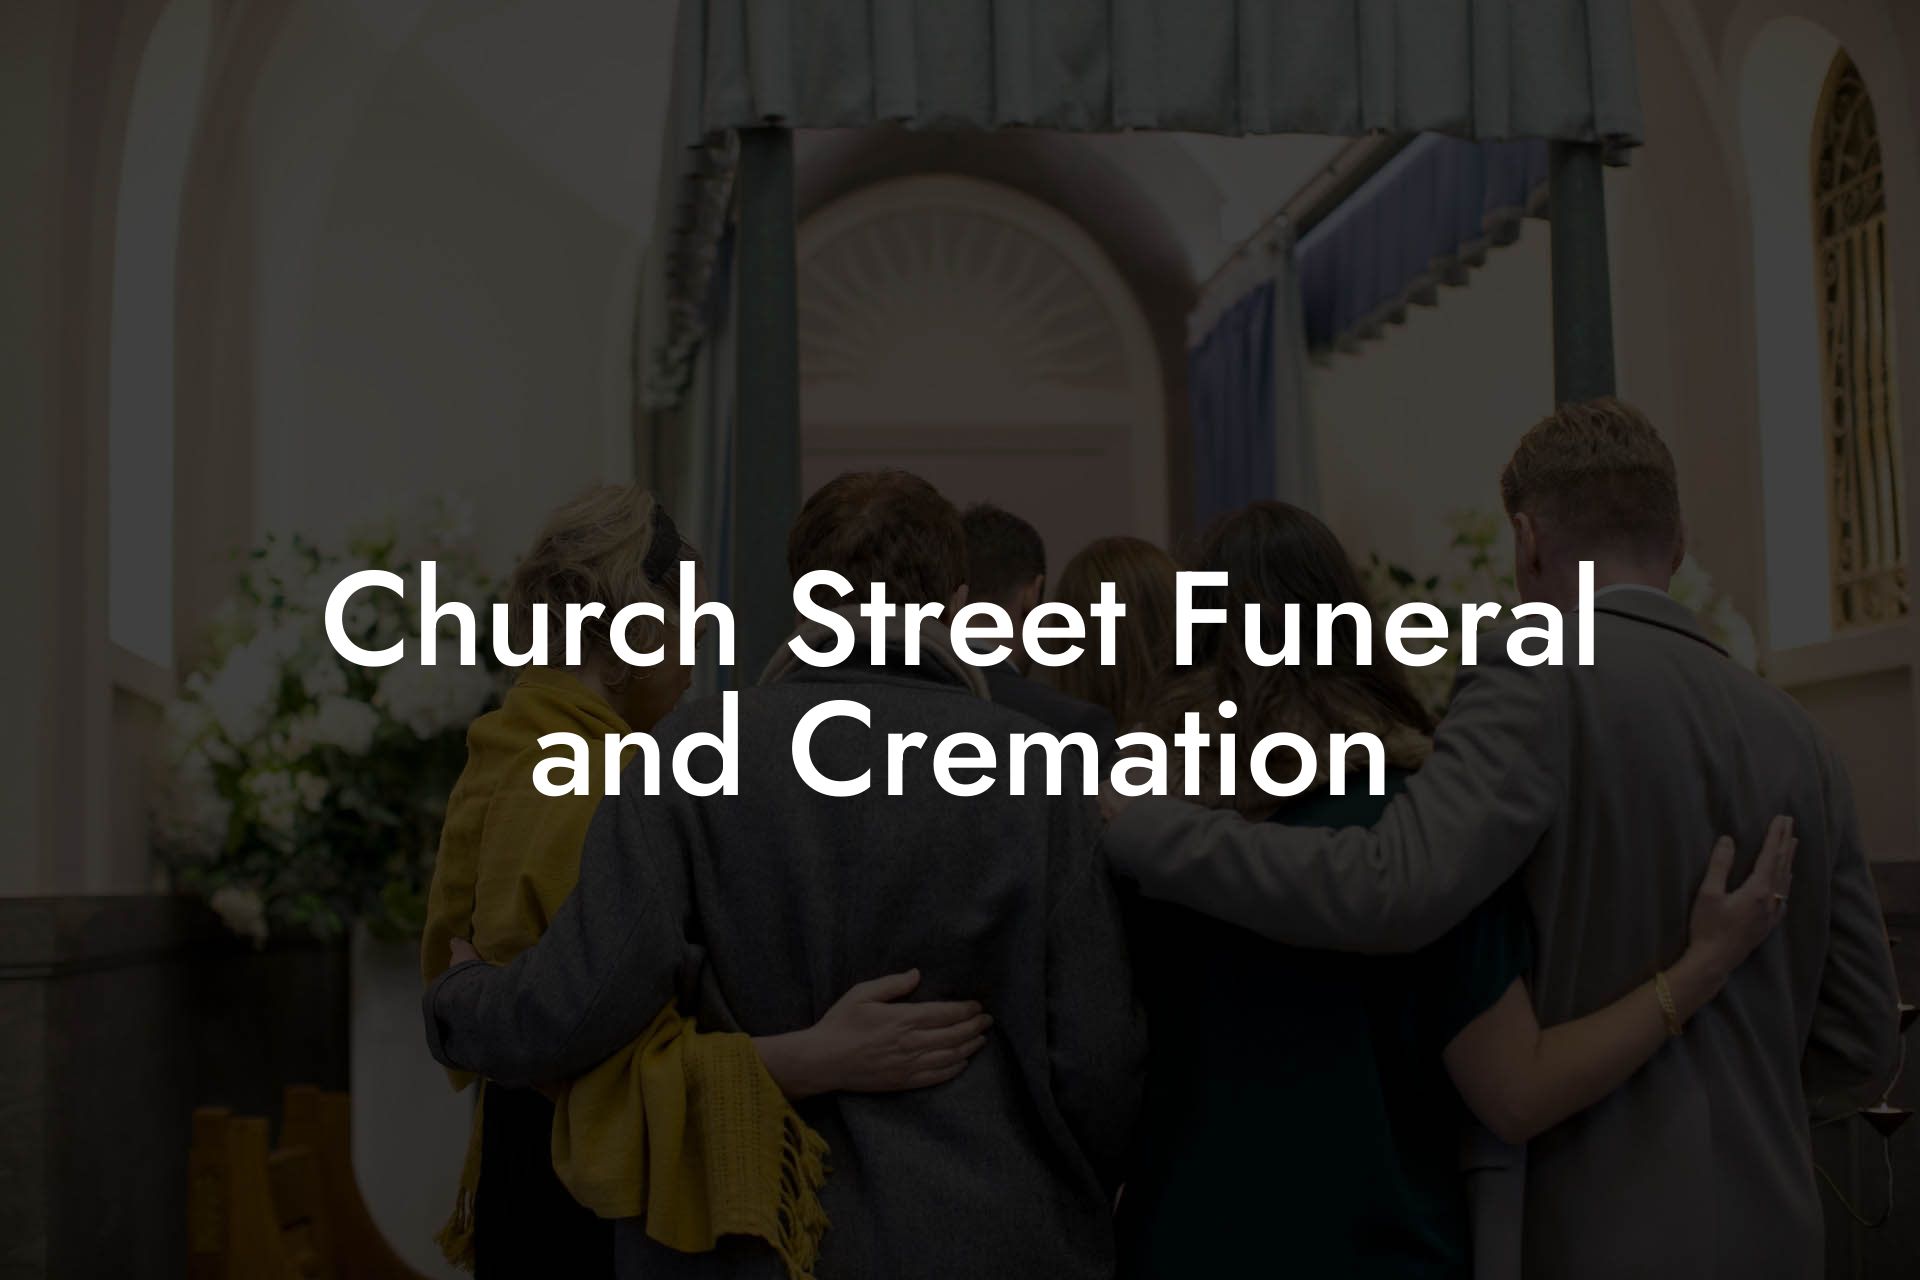 Church Street Funeral and Cremation